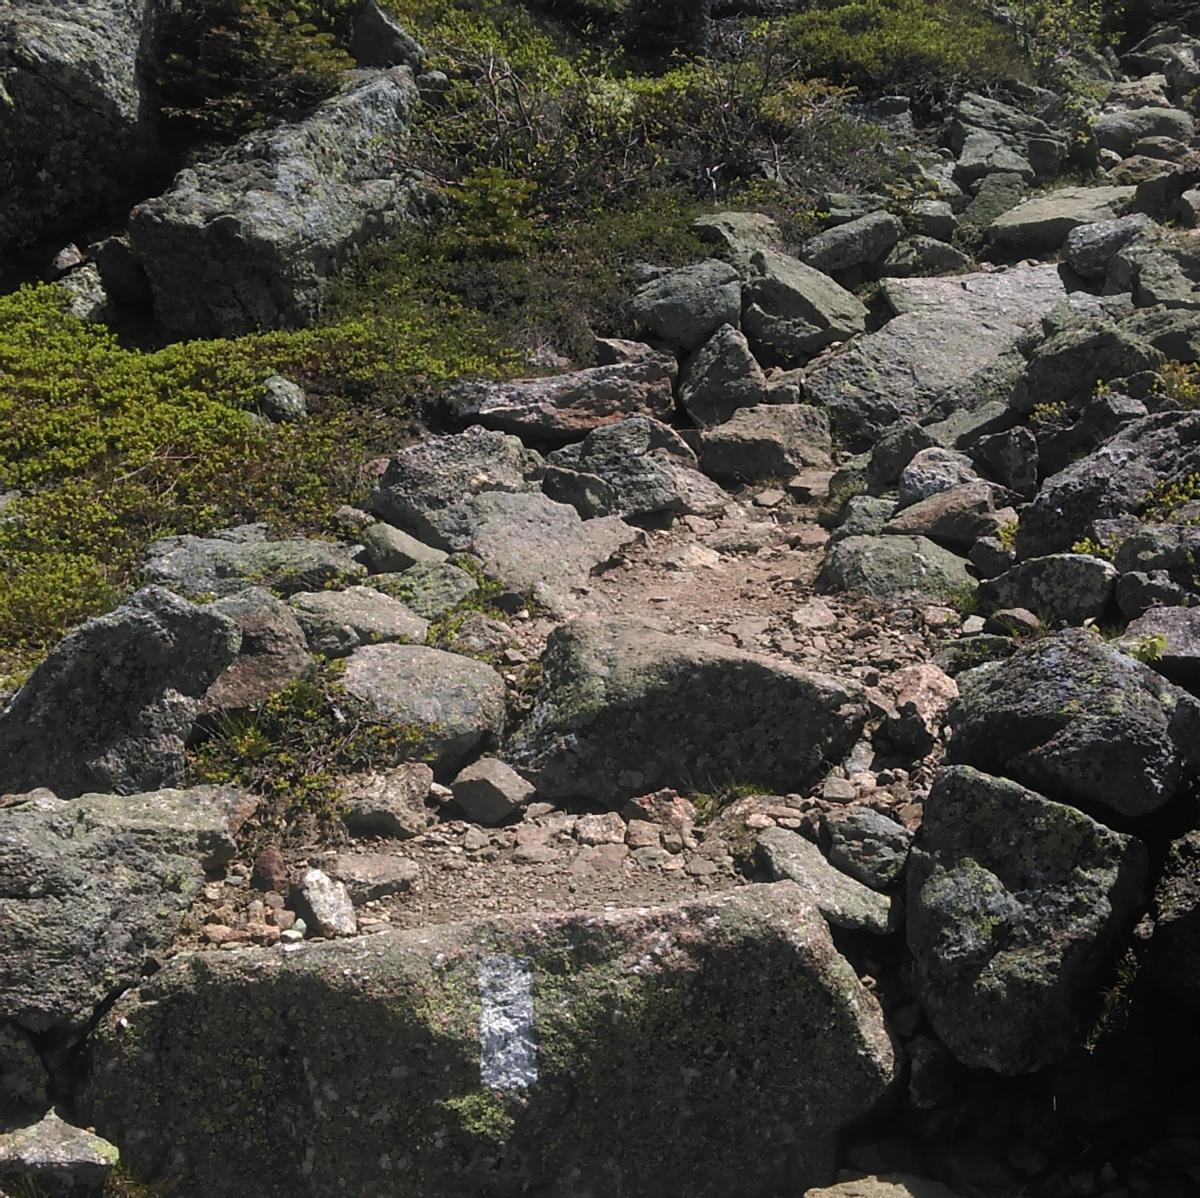 A trail marked with a white blaze on rock is made up of a mix of rocks and sand.